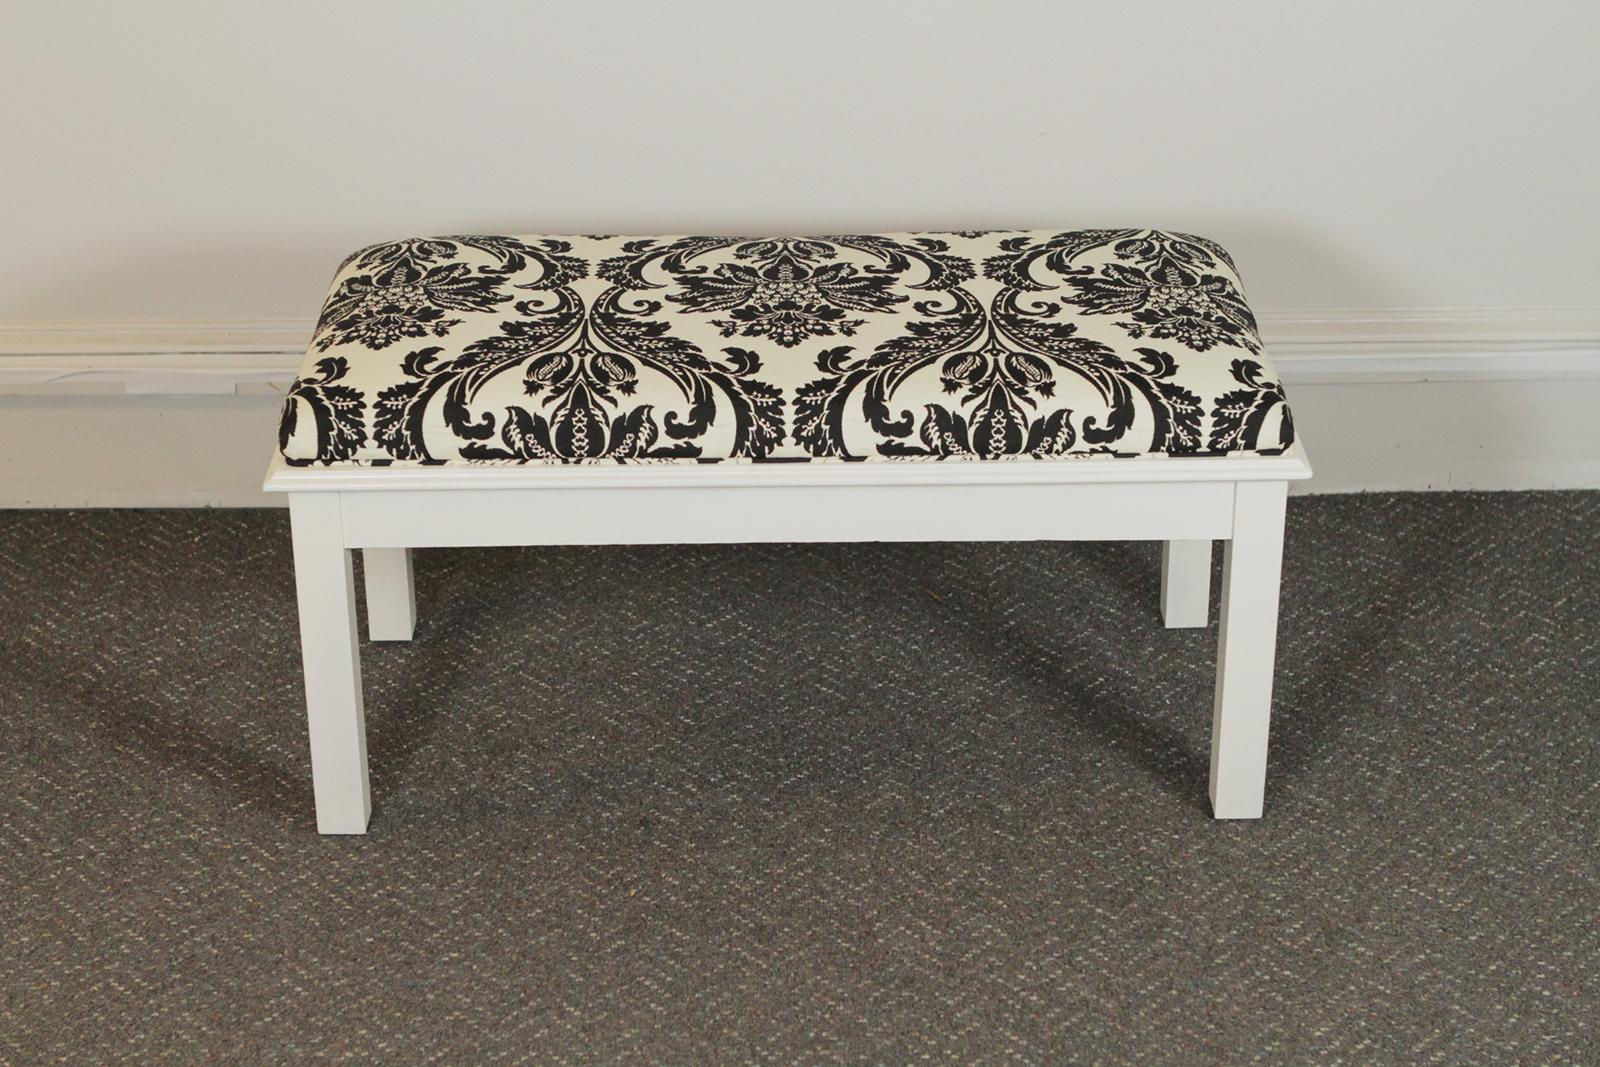 Pair of Modern White Painted Wood Upholstered Benches (Gemalt)